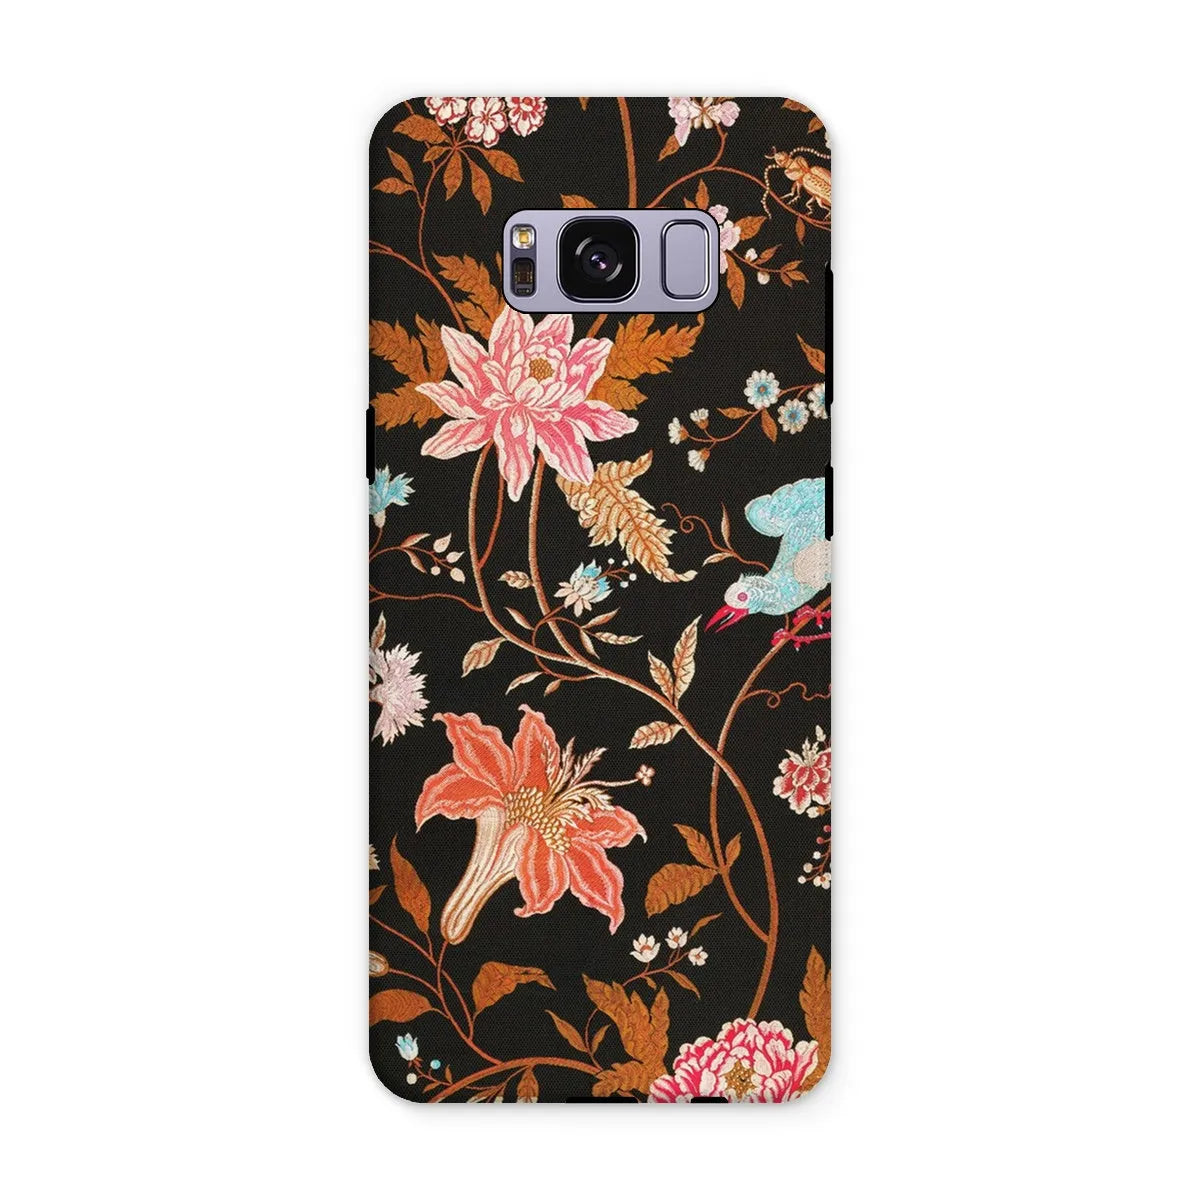 Midnight Call - Indian Aesthetic Fabric Art Phone Case - Samsung Galaxy S8 Plus / Matte - Mobile Phone Cases